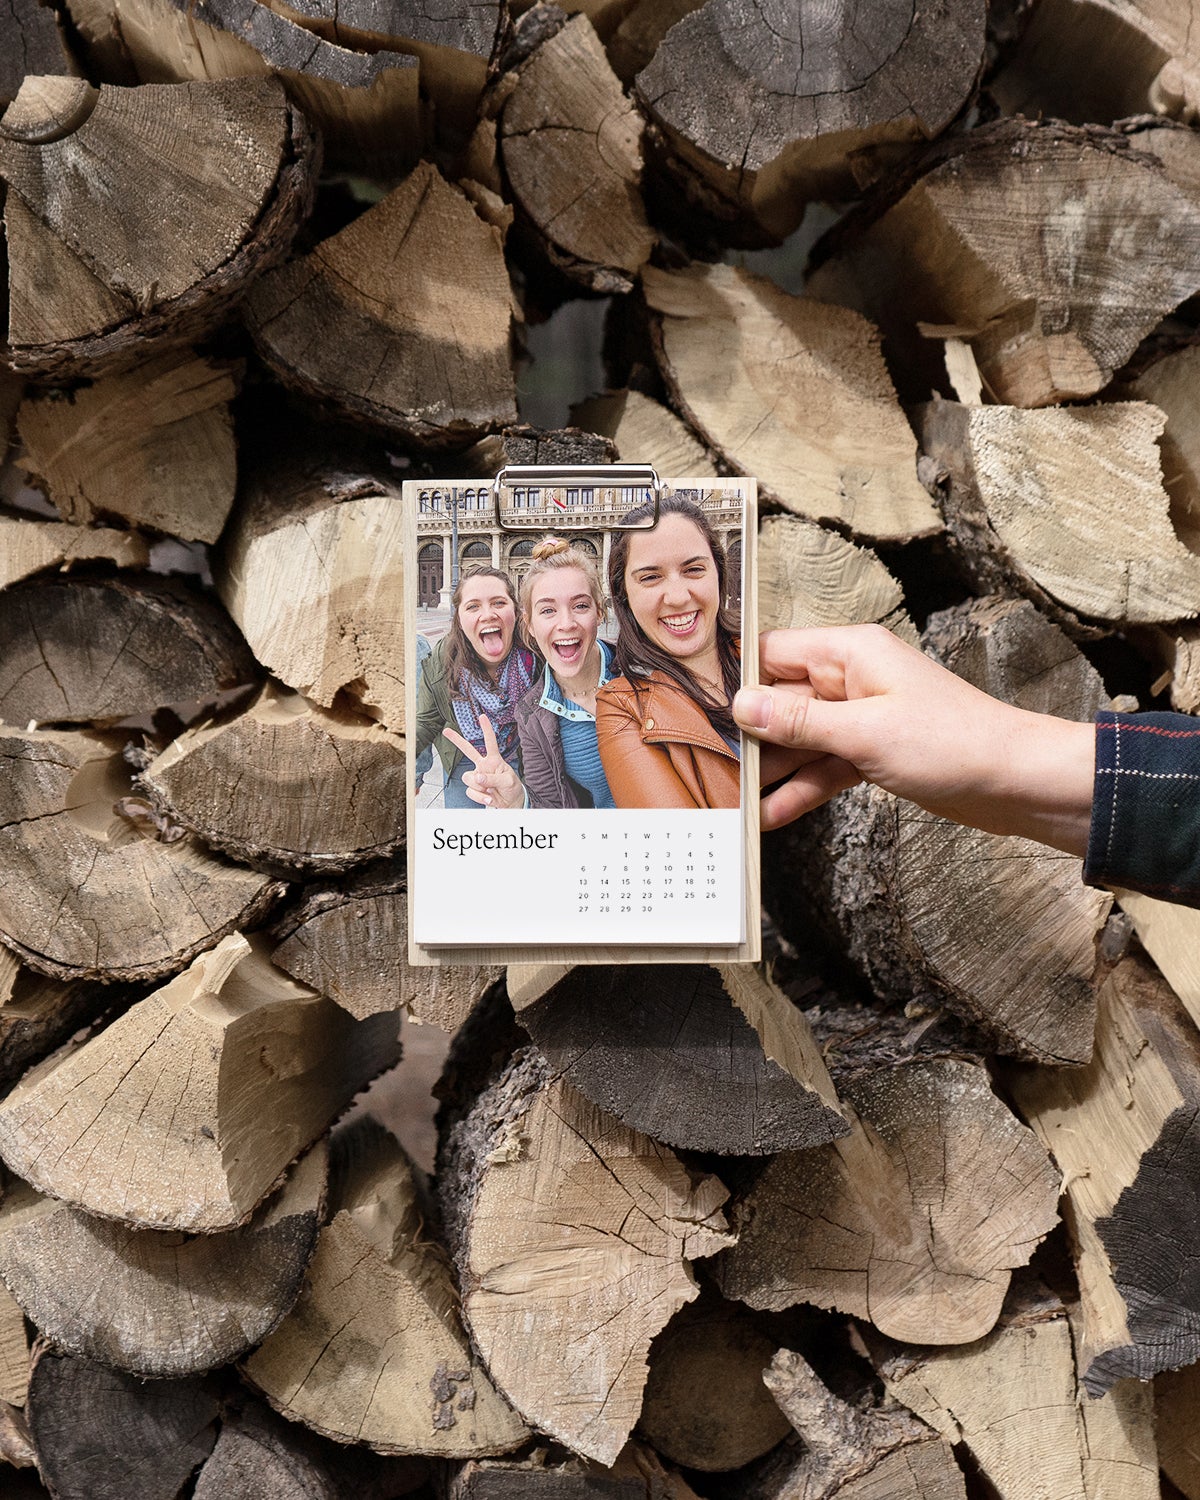 Hand holding up photo calendar with selfie of three friends featured